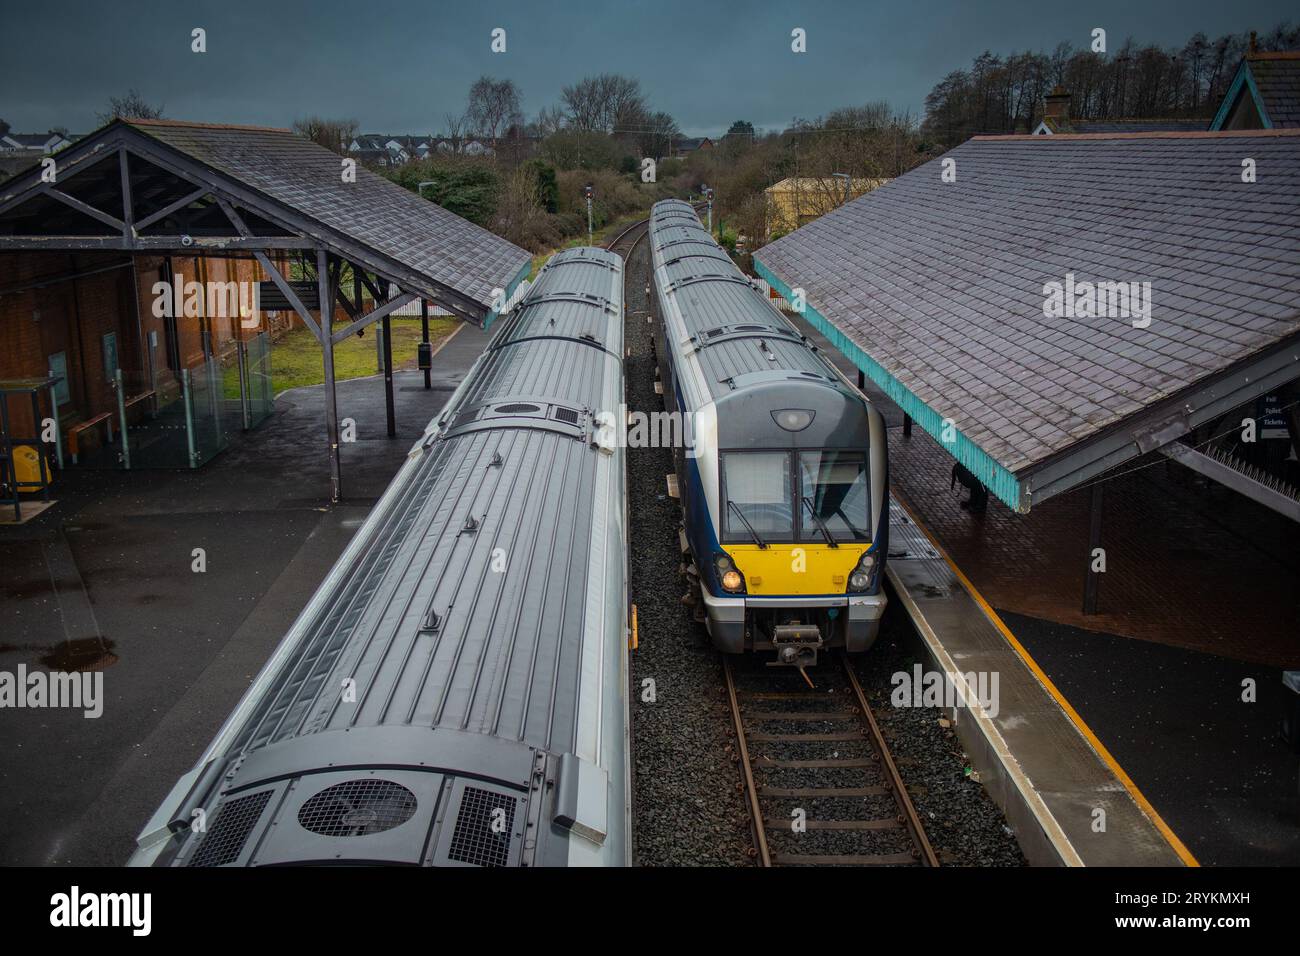 Two diesel trains are crossing at ballymoney train station in northern ireland. Looking towards the trains and train tracks from the pedestrian overpa Stock Photo